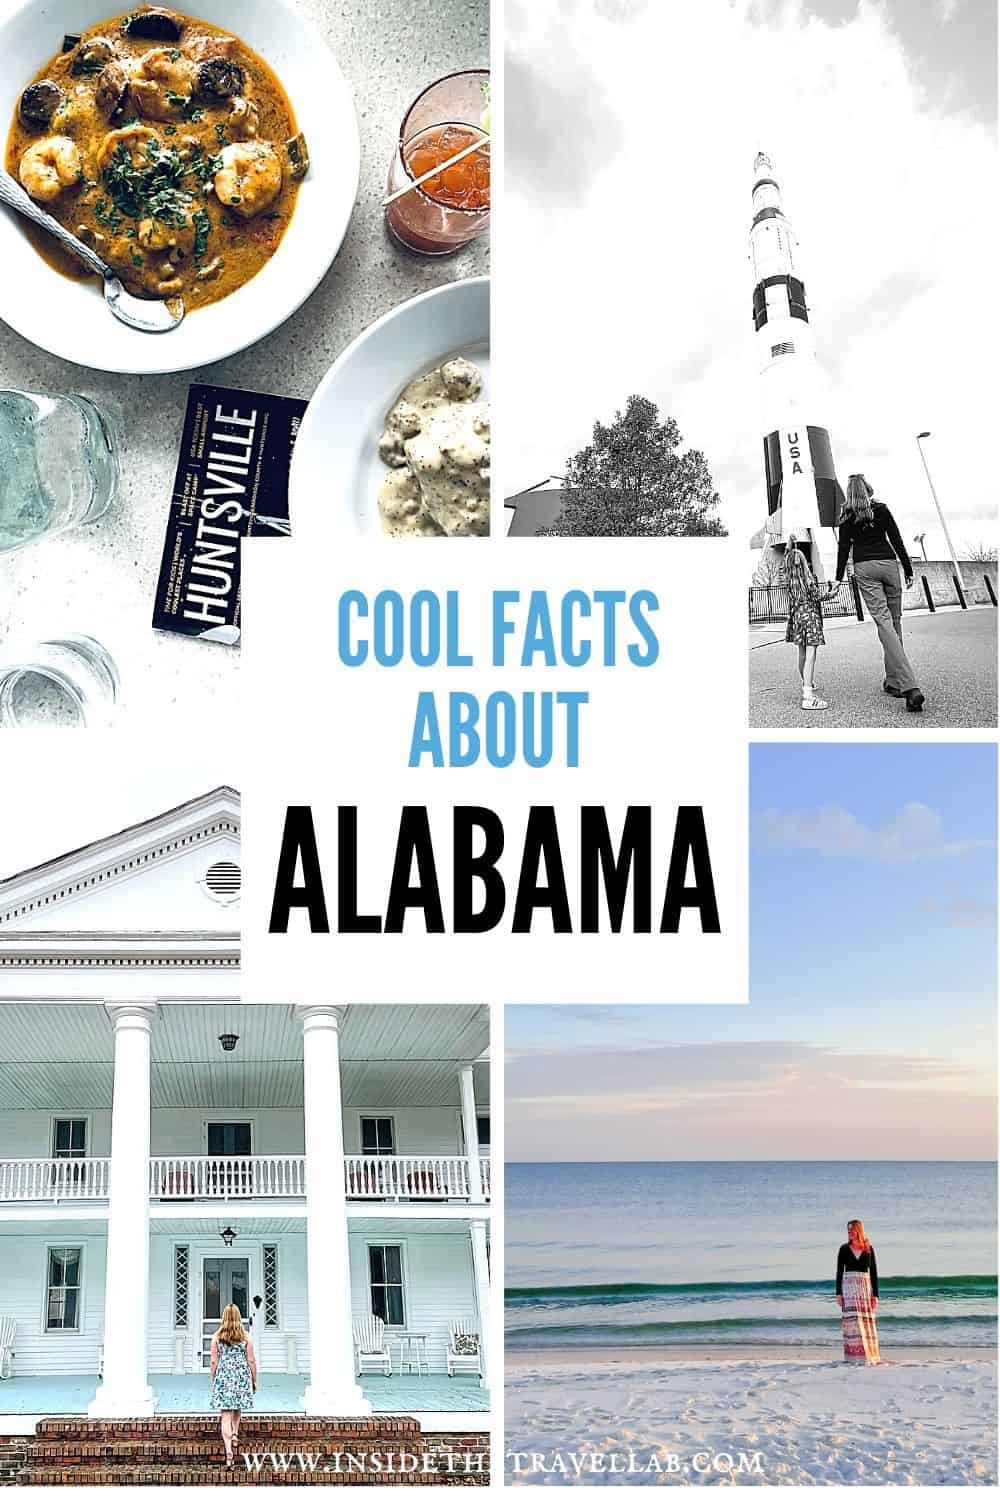 Cool and interesting facts about Alabama